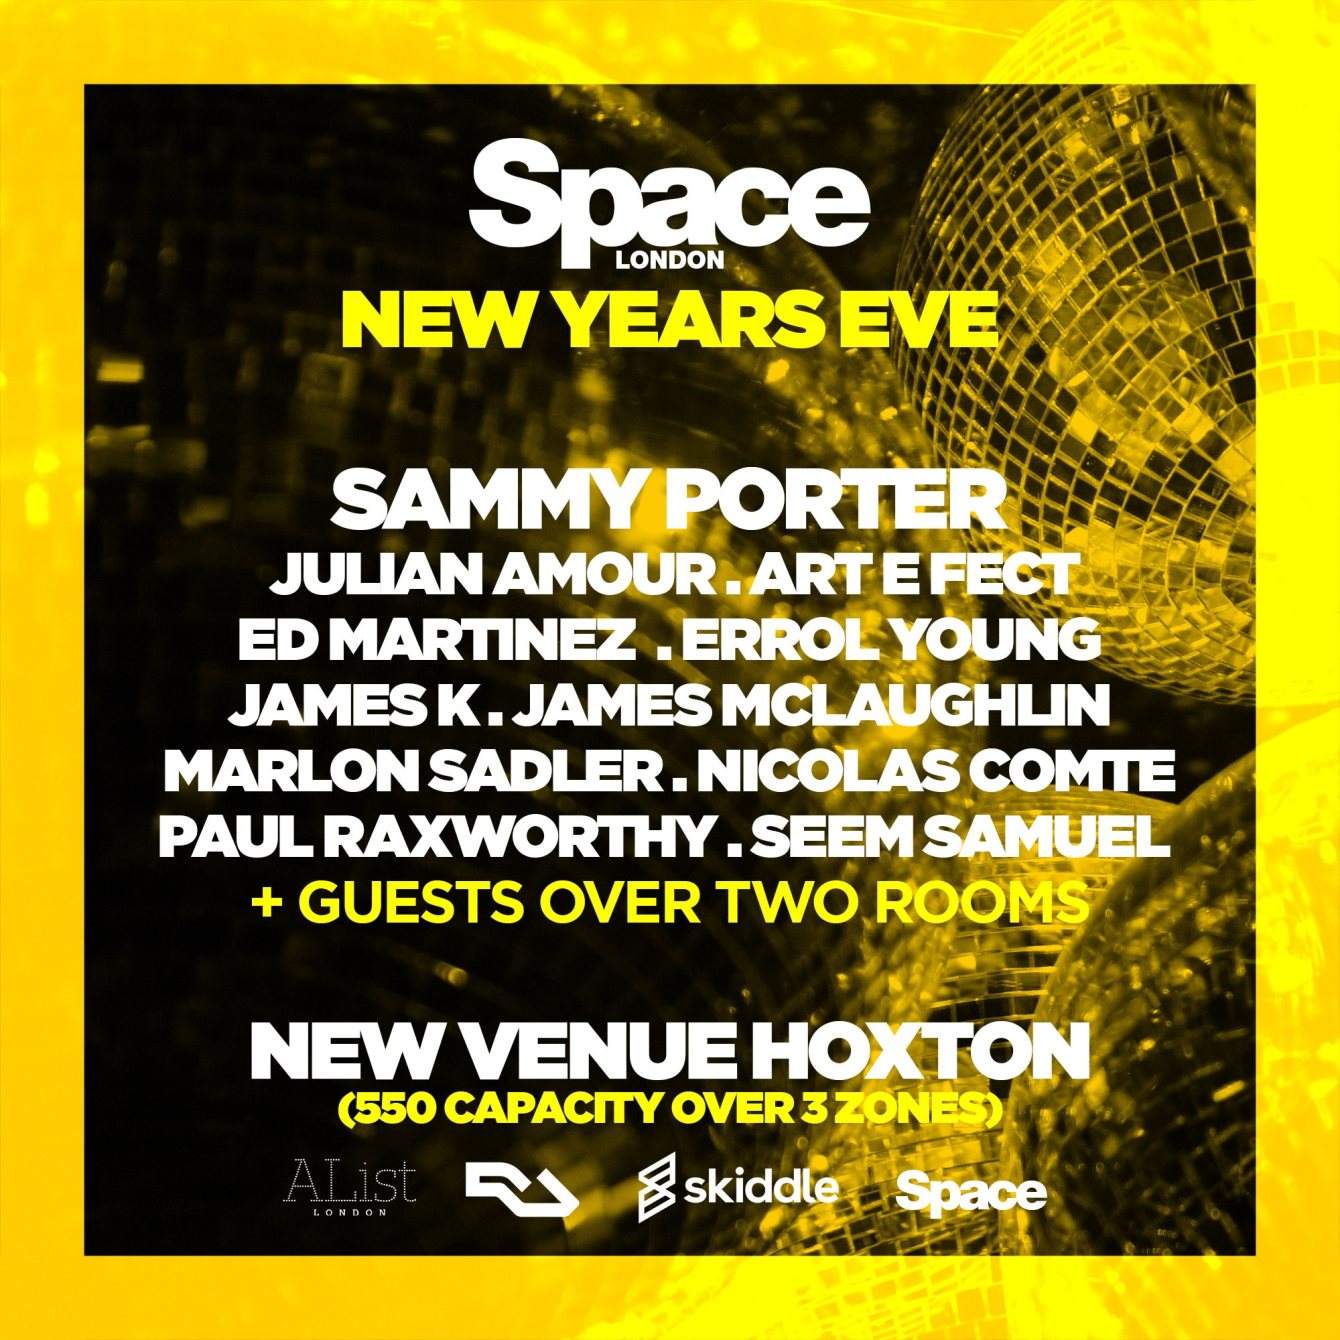 Space New Year's Eve Back to the Disco with Sammy Porter - Página trasera